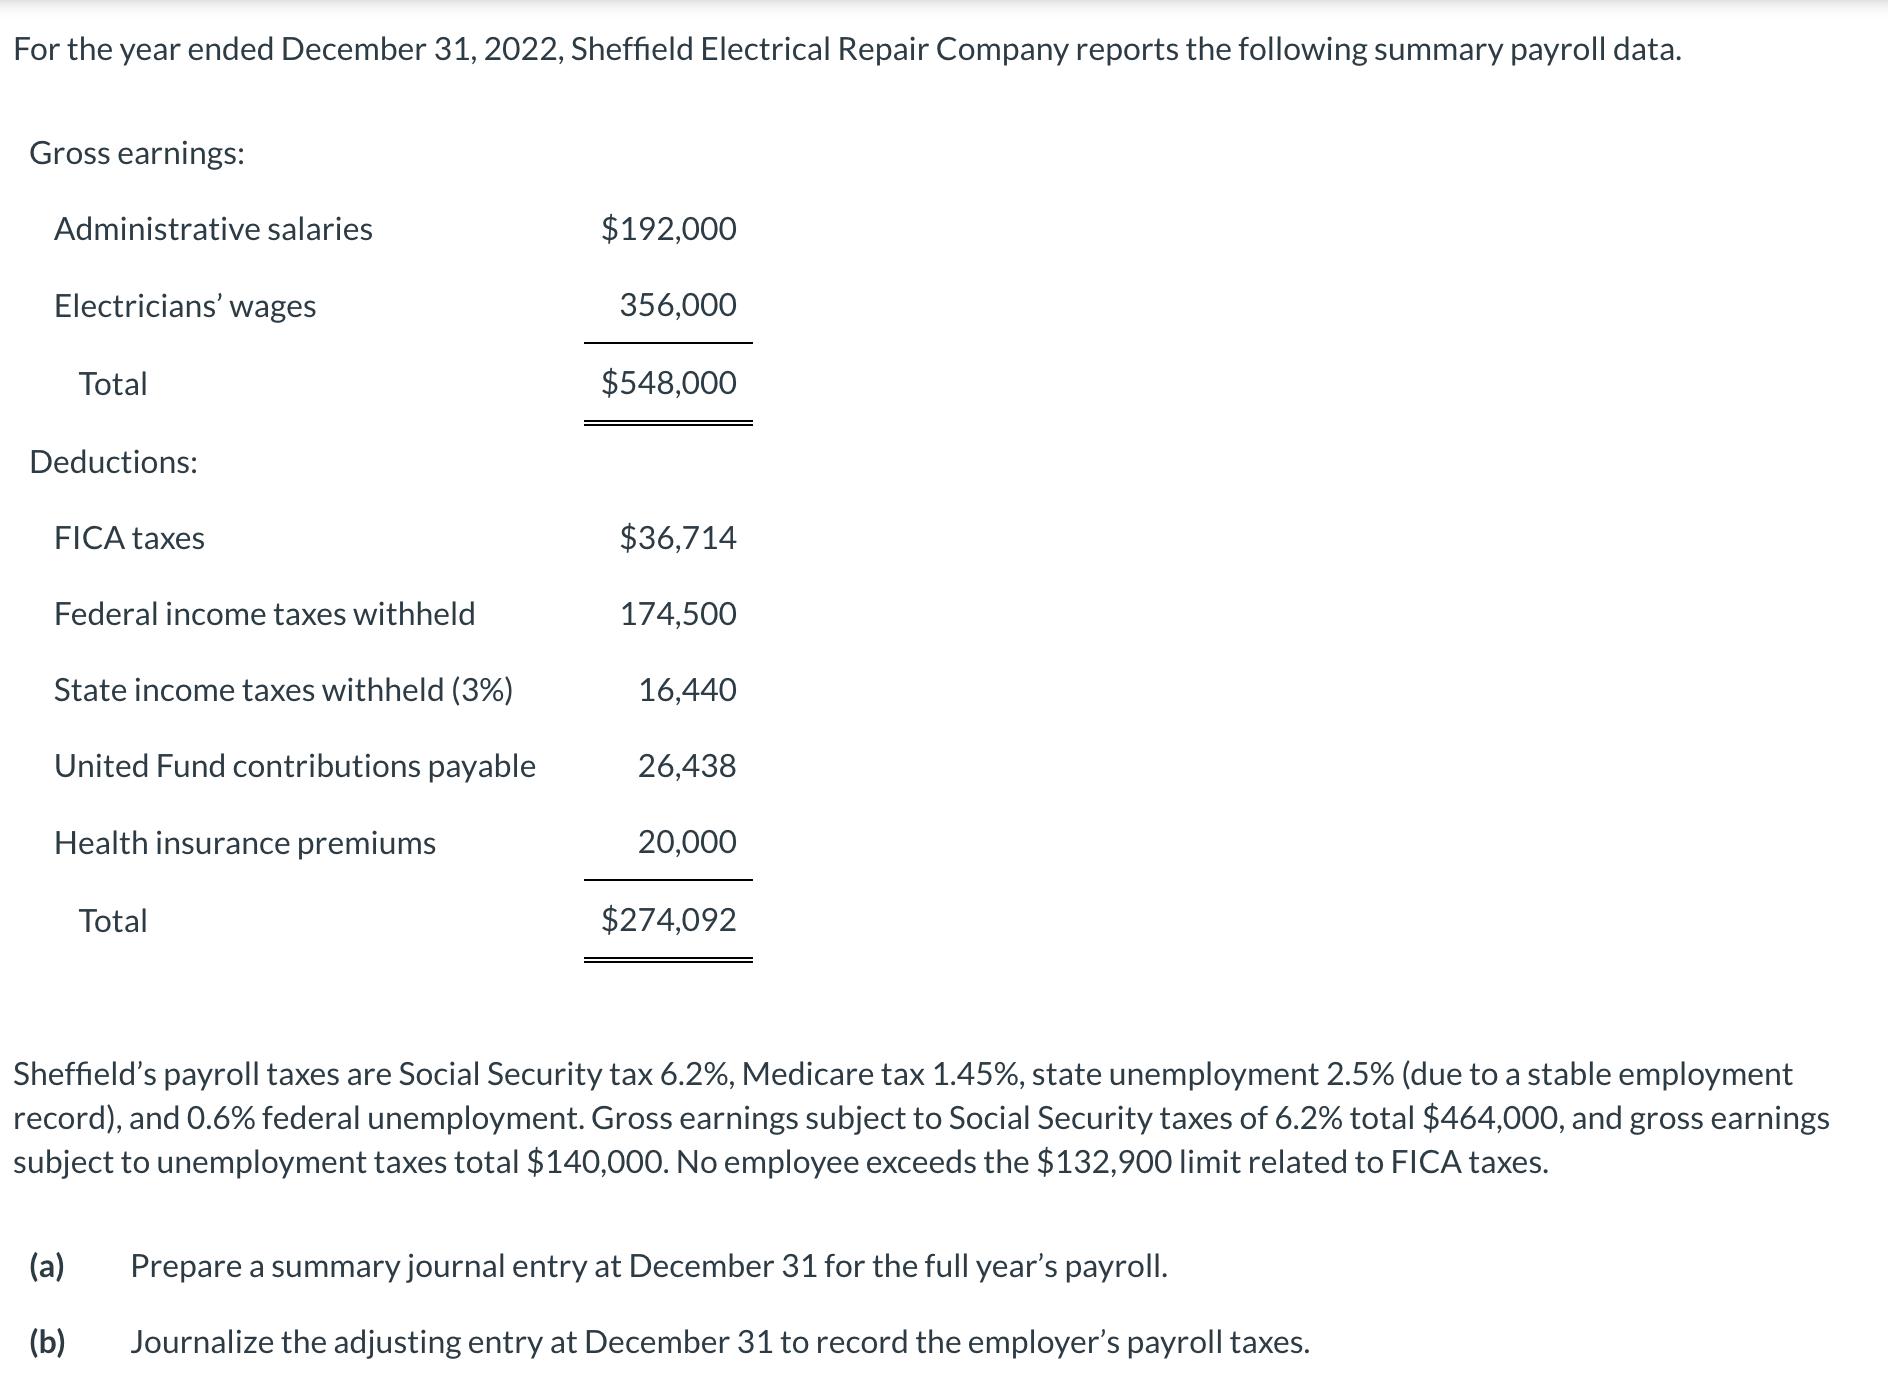 For the year ended December 31, 2022, Sheffield Electrical Repair Company reports the following summary